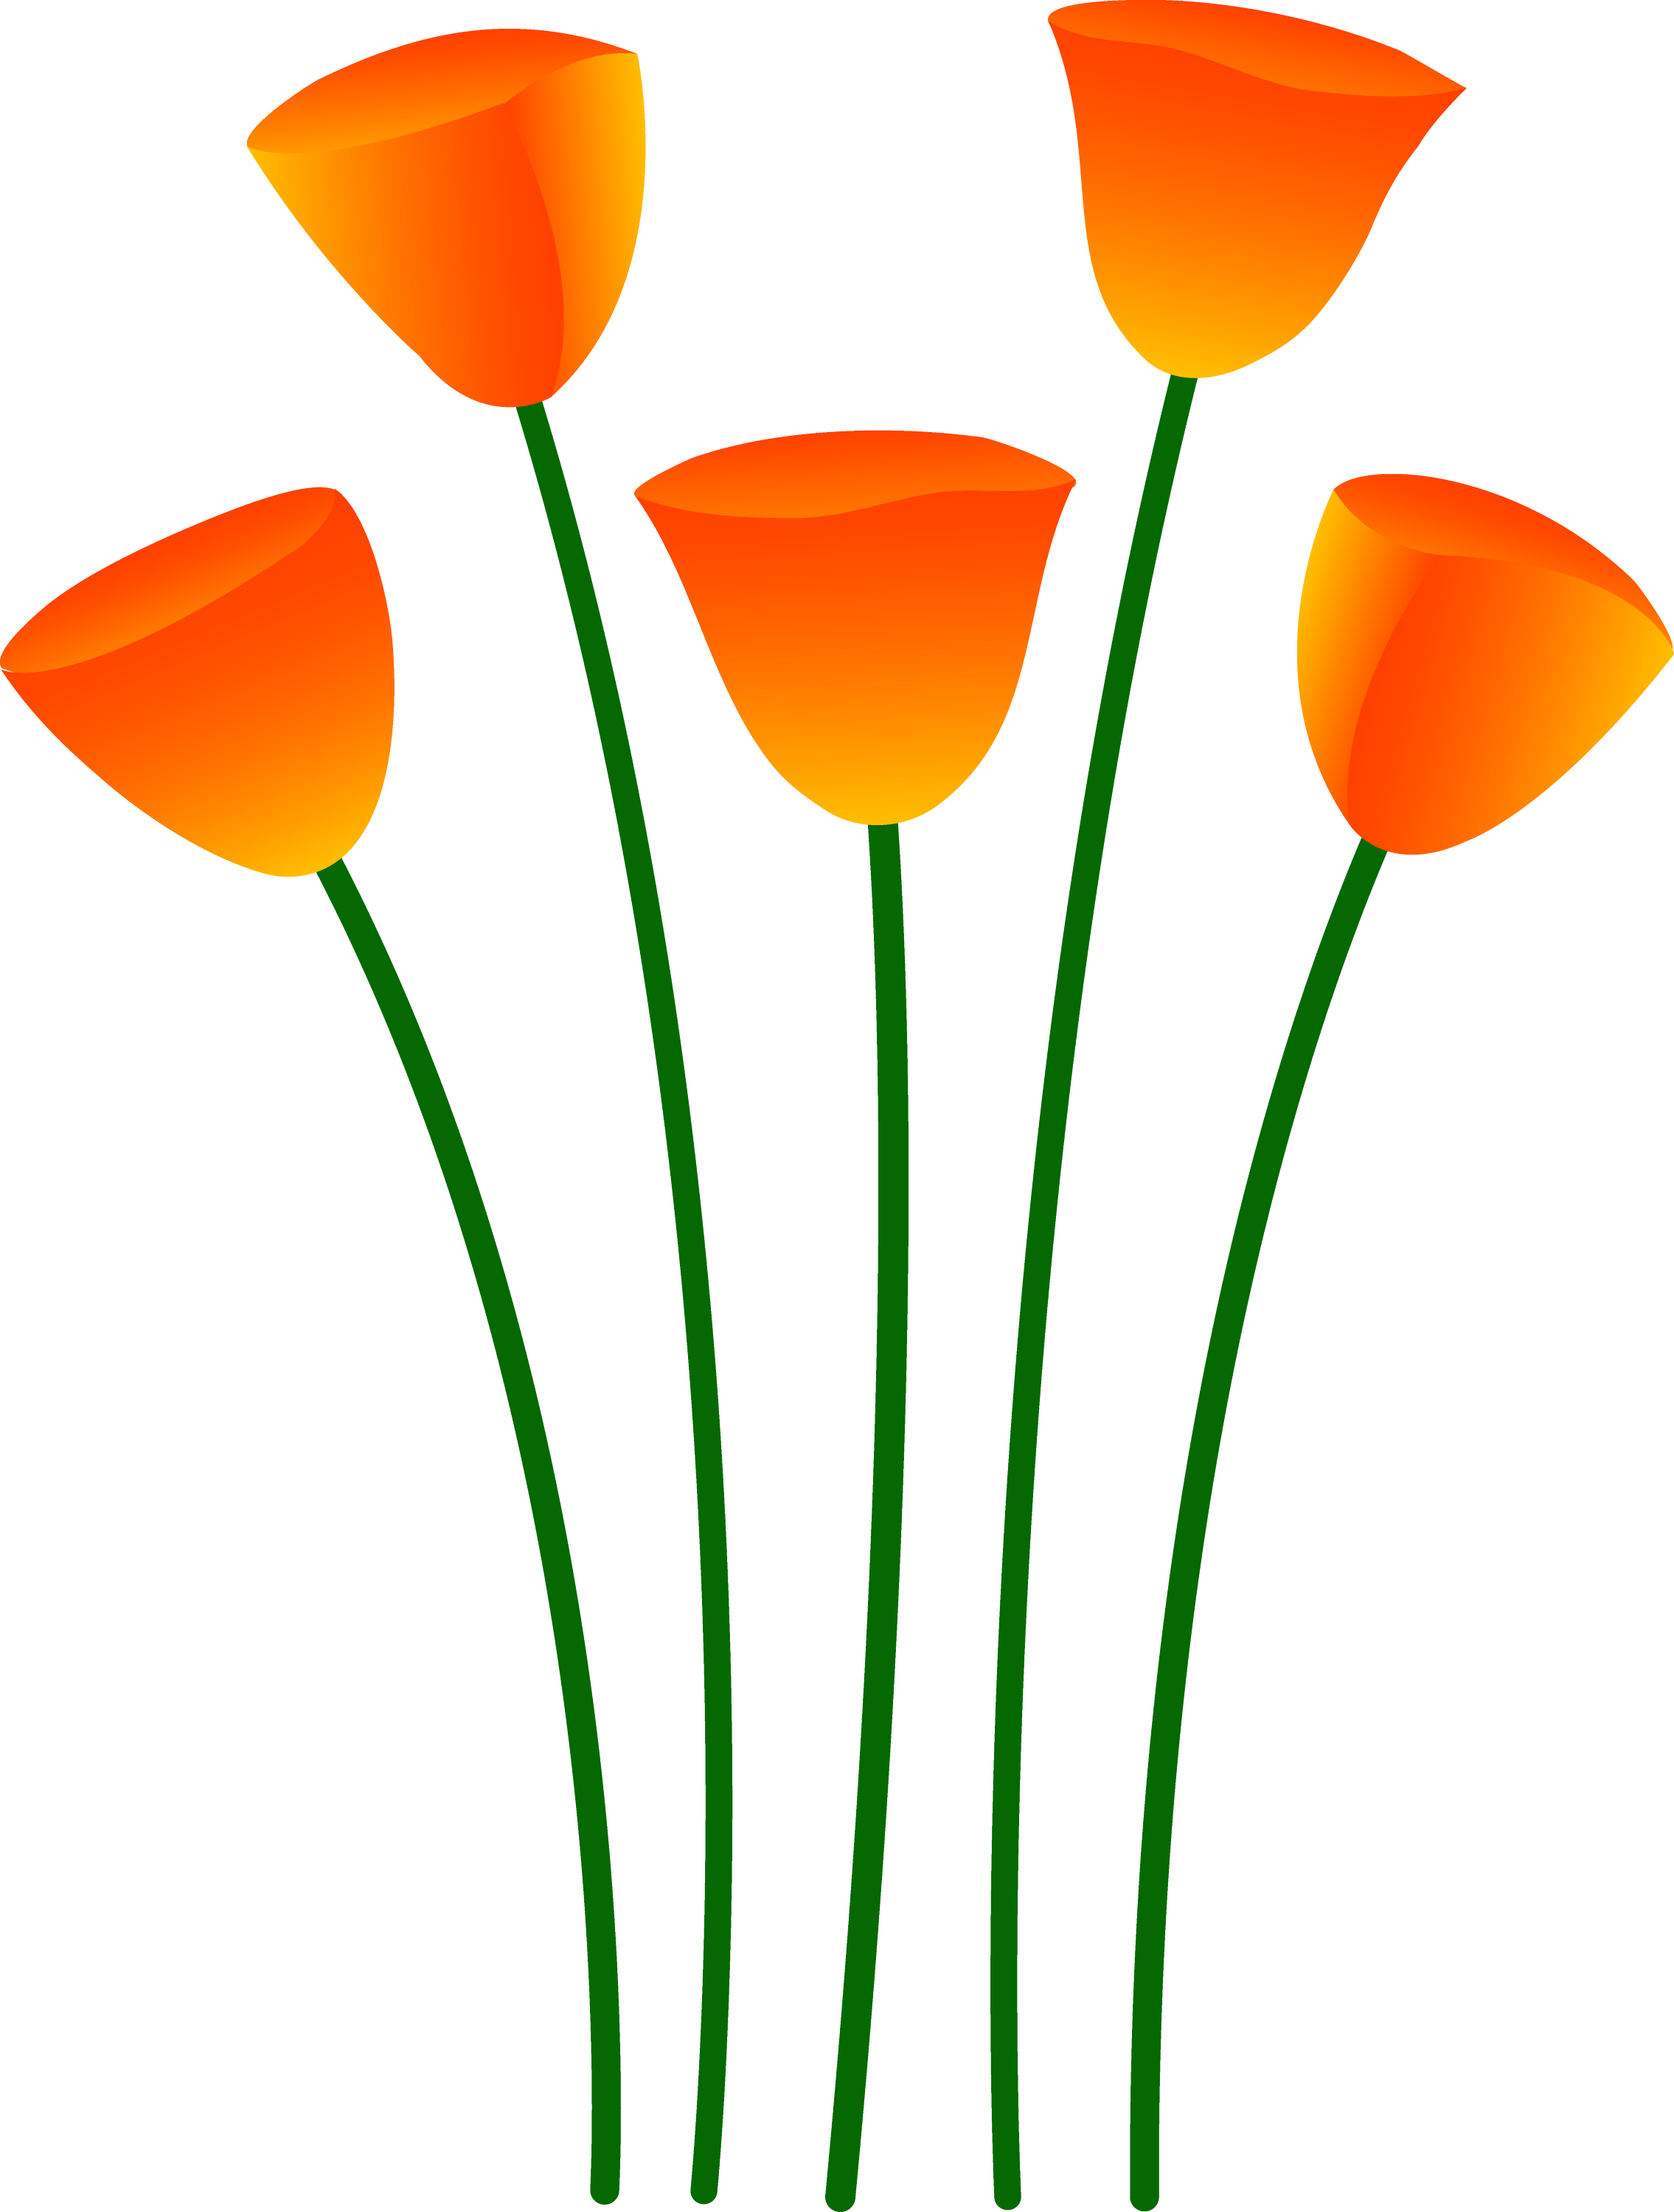 free clipart images poppies - photo #30